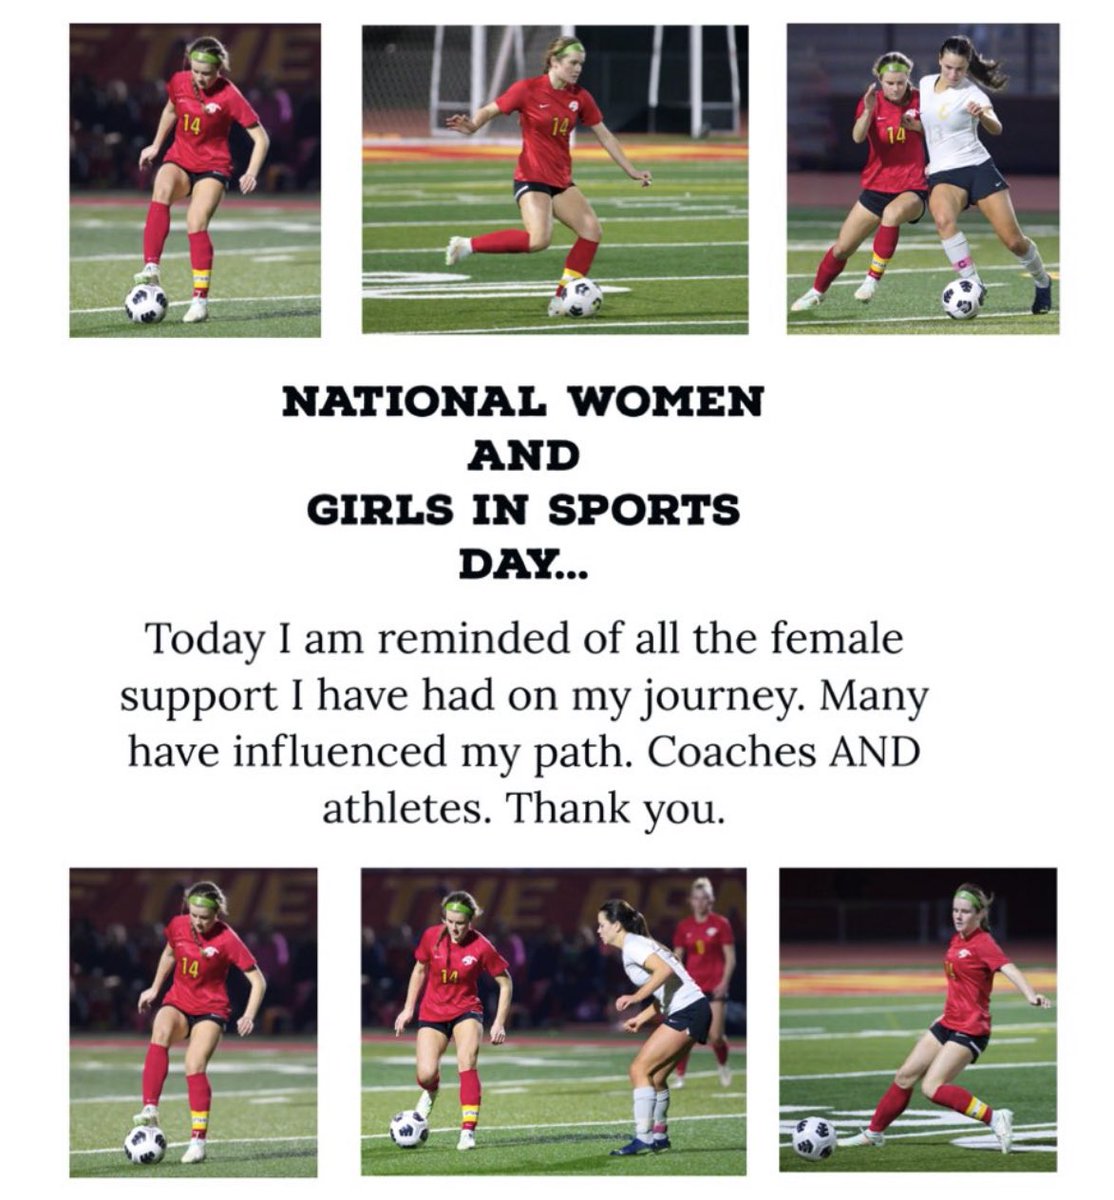 I feel very lucky to be on this soccer journey in 2023! @NcsaSoccer @womencoaches @NCAASoccer @naia